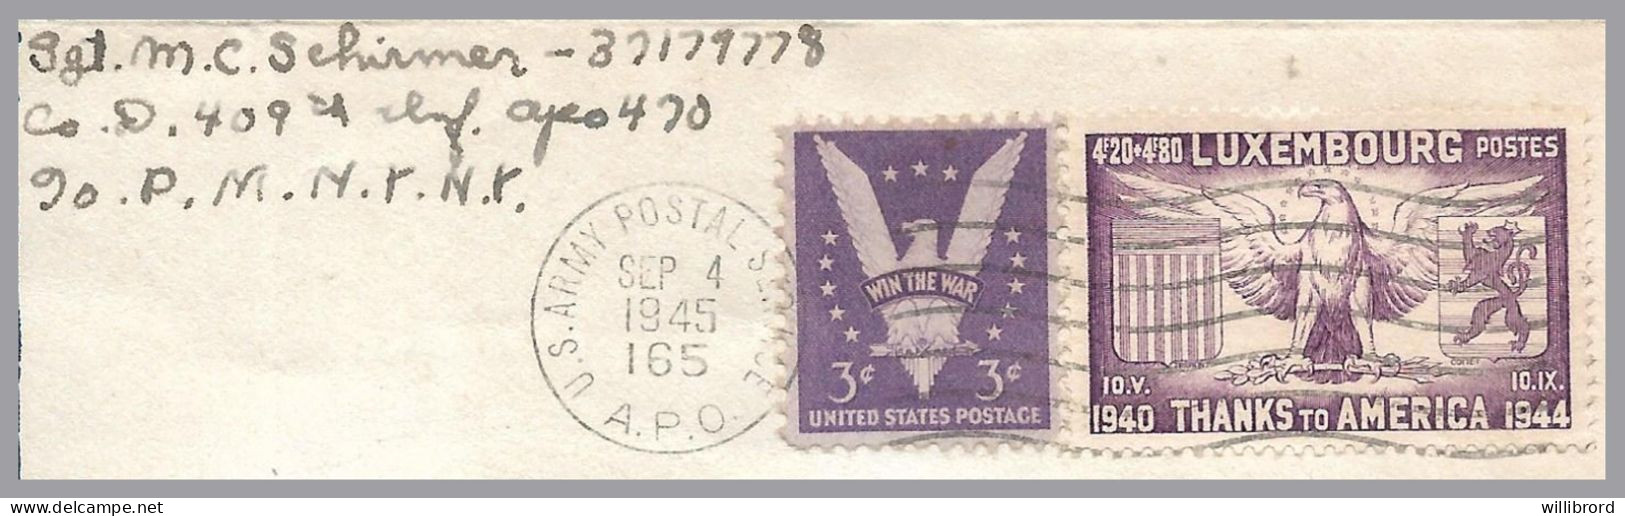 LUXEMBOURG - USA 1945 - US APO 165 [St. Villary En Caux, France] - 4.20F+4.80F Thanks To America With 3c US Victory - Brieven En Documenten